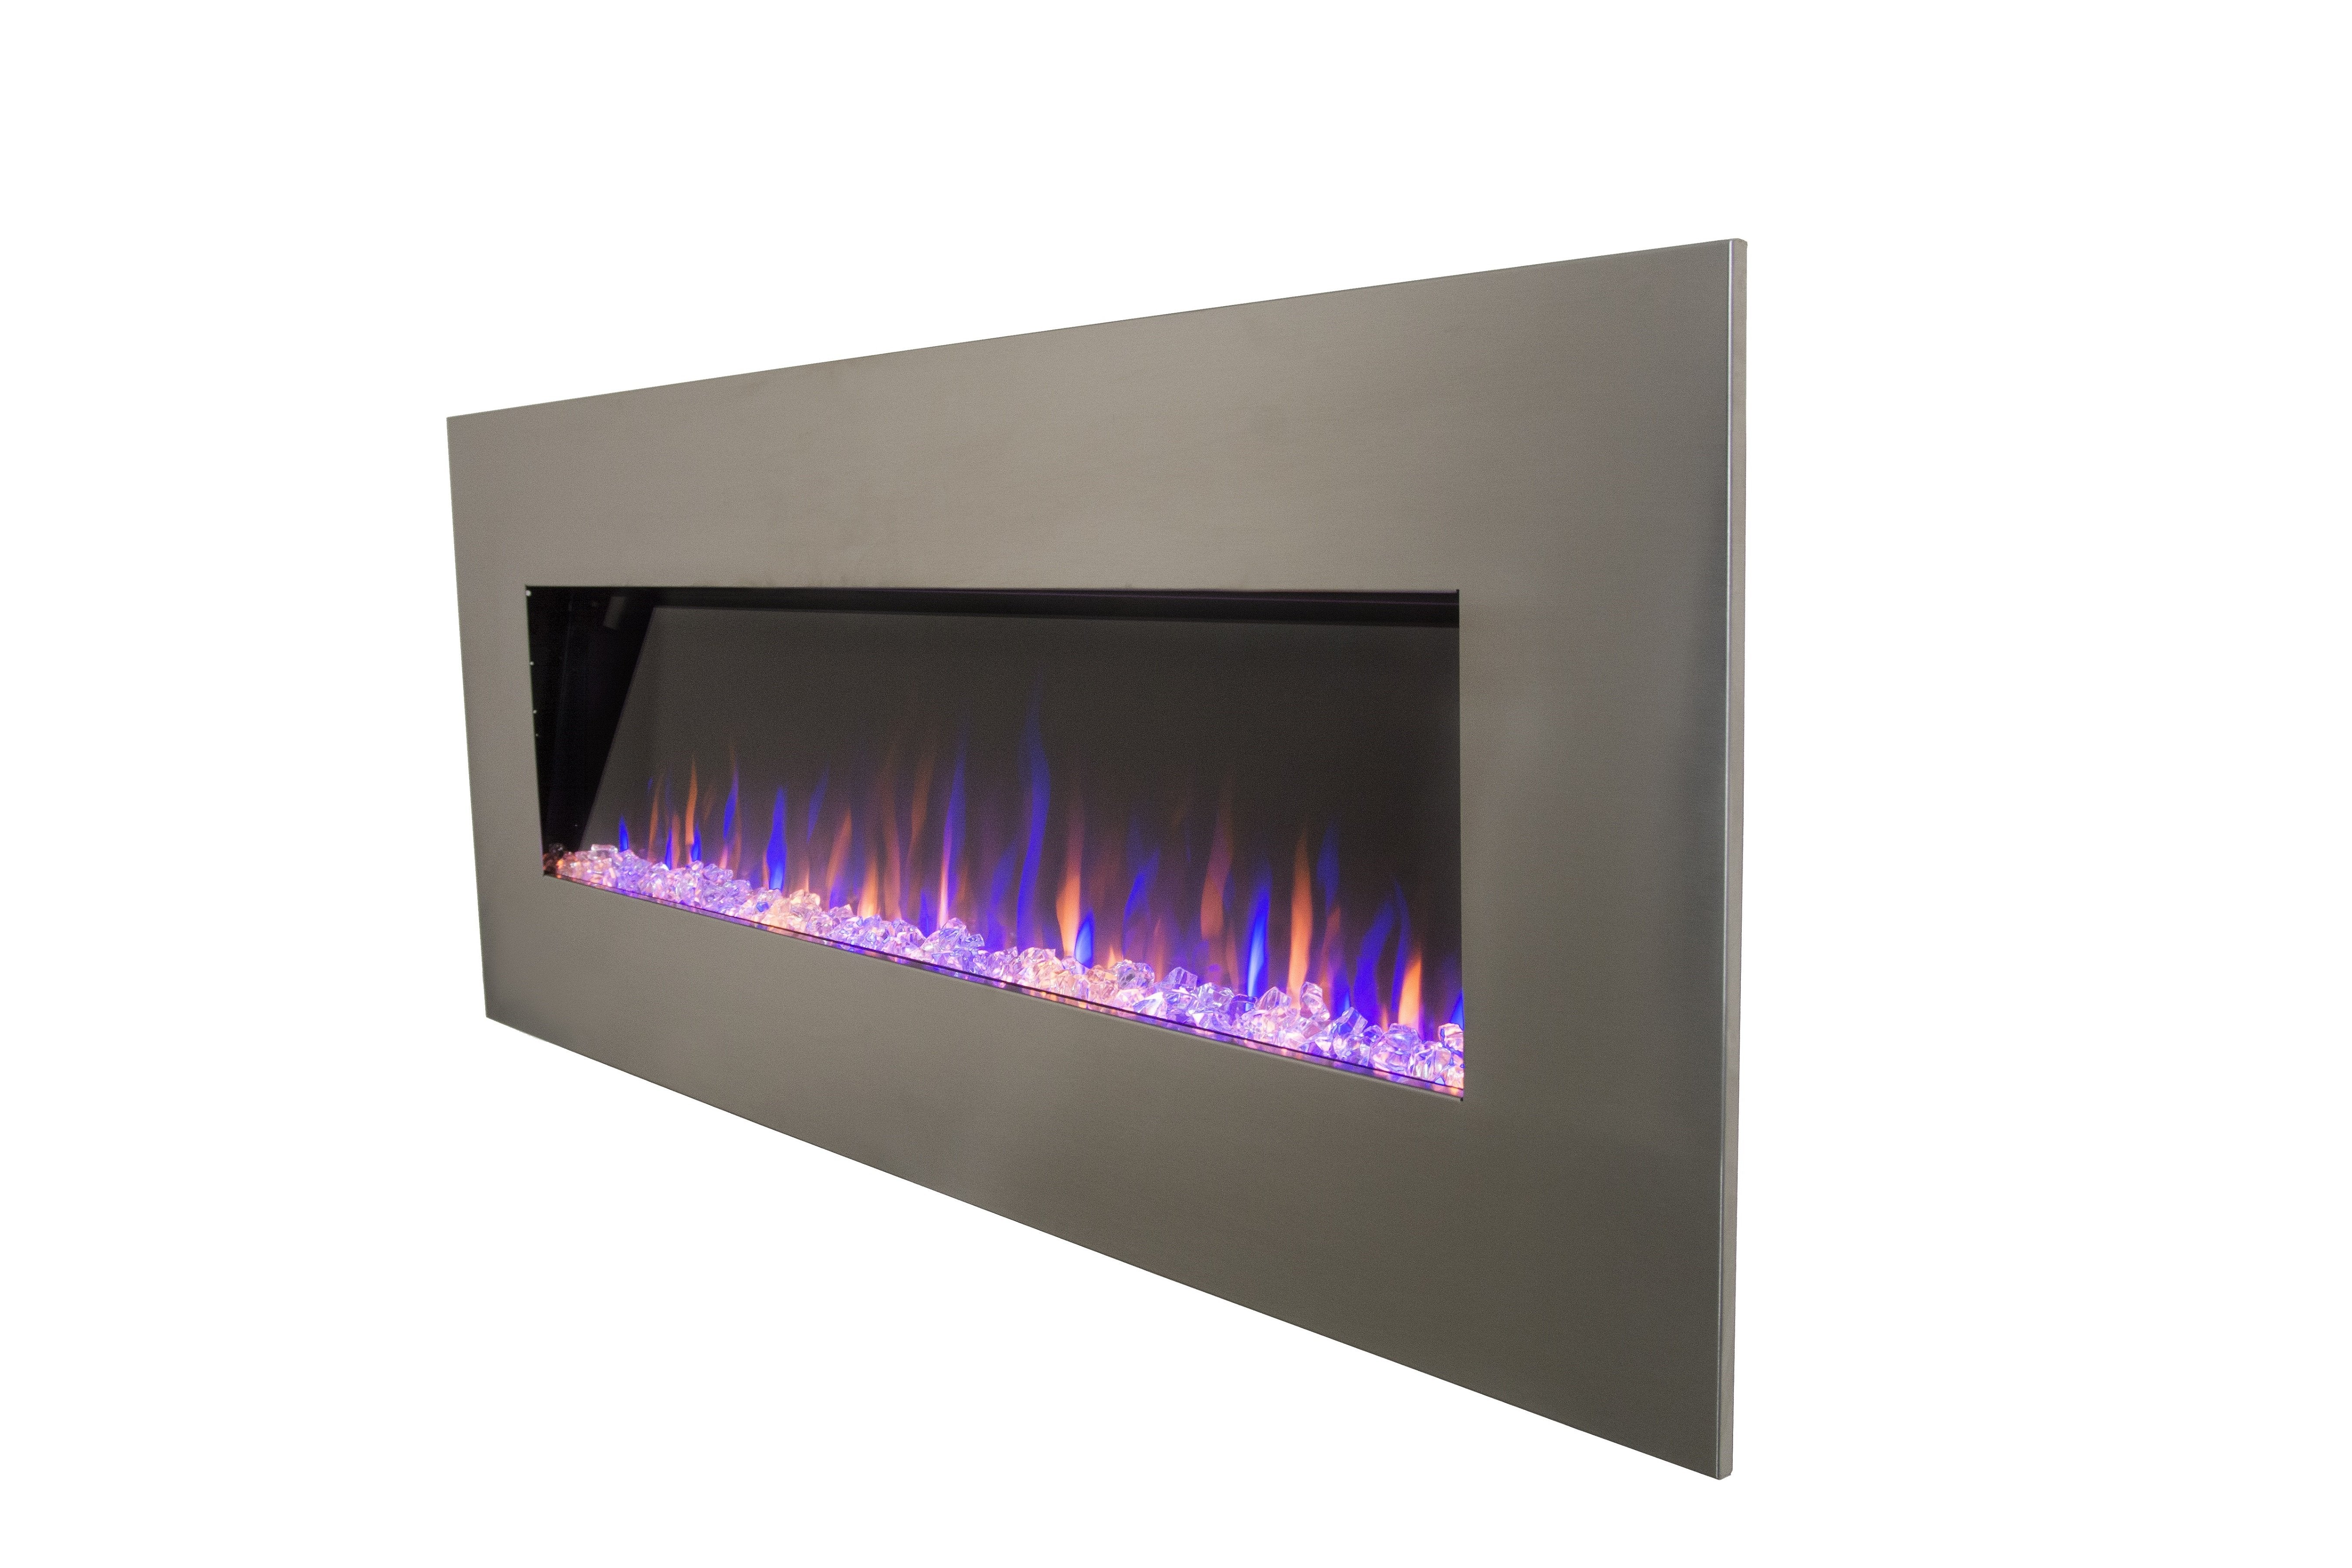 AudioFlare 80024 Stainless 50 Inch Recessed Electric Fireplace from a angle.